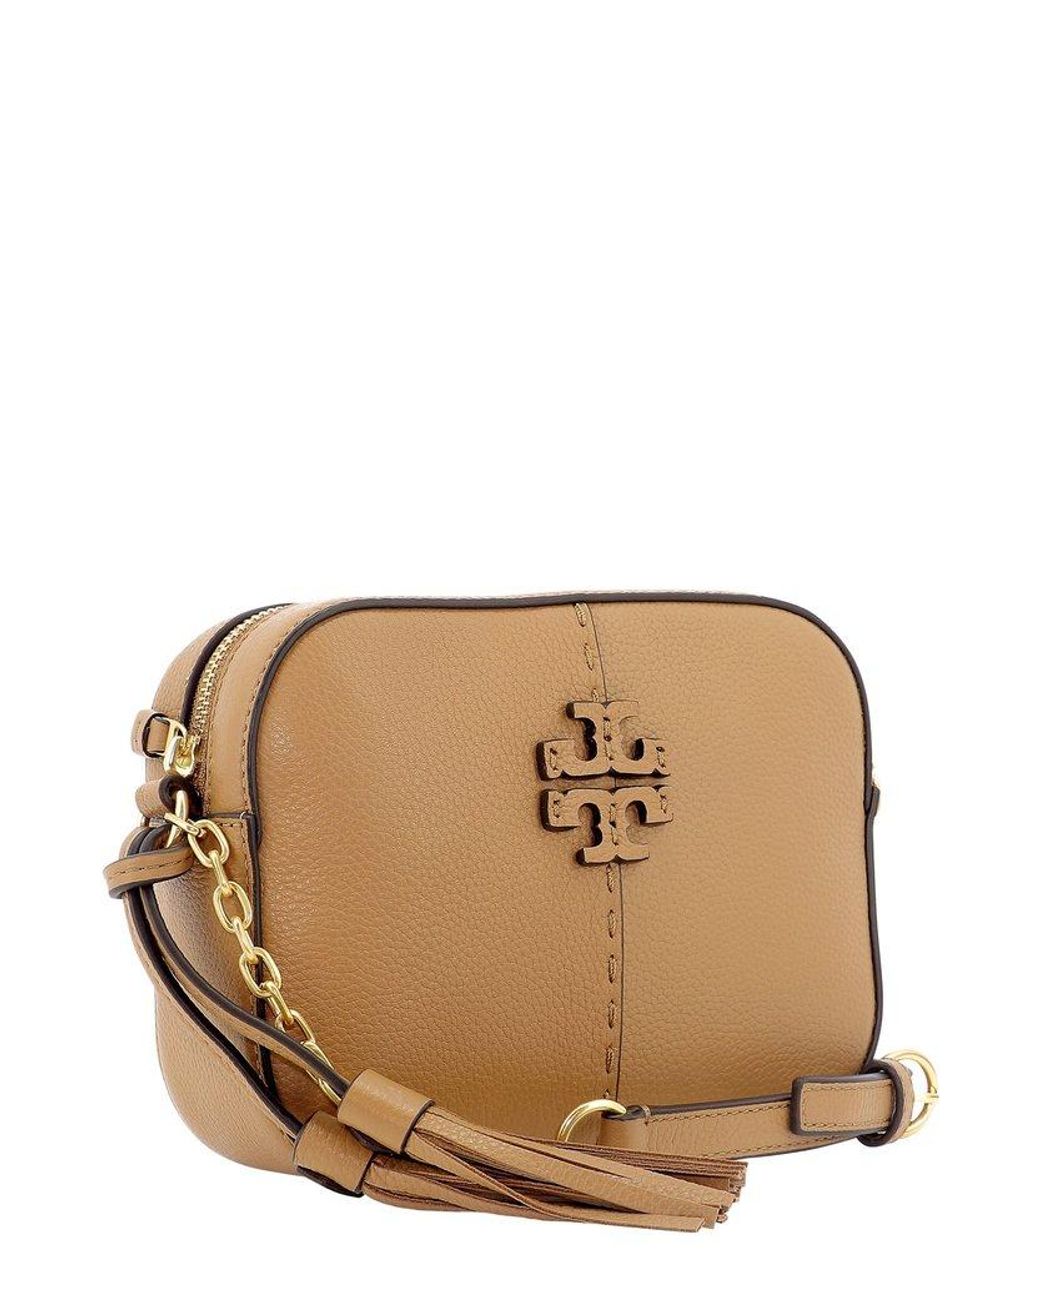 Tory Burch Mcgraw Leather Camera Bag in Natural | Lyst Canada